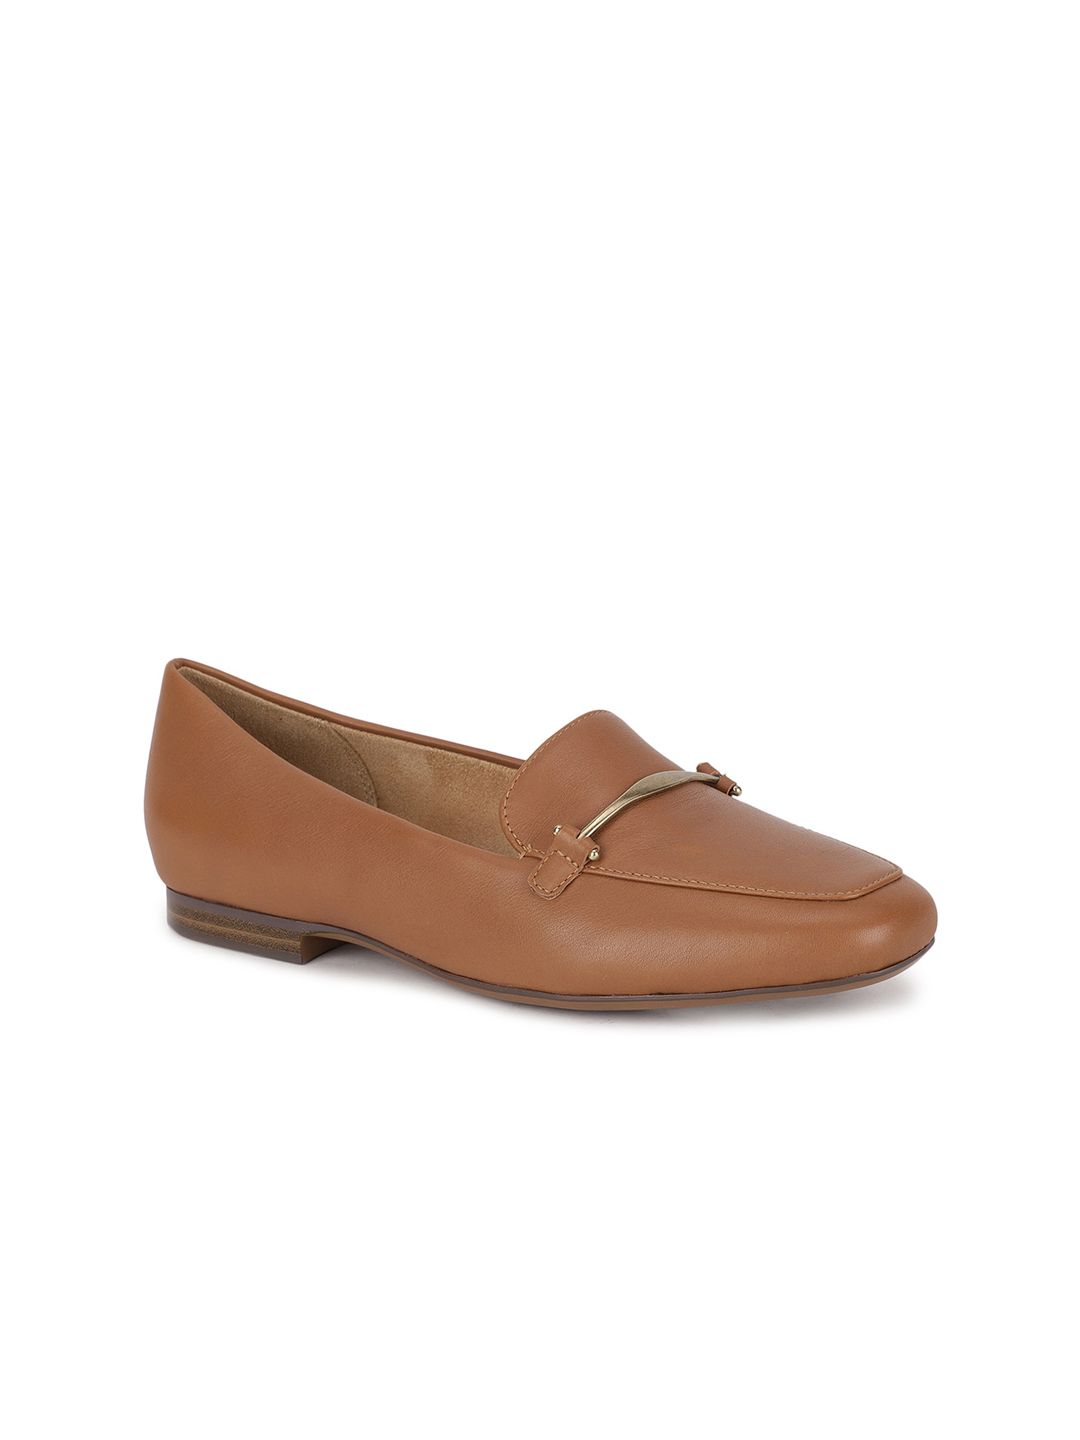 Naturalizer Women Brown Leather Loafers Price in India